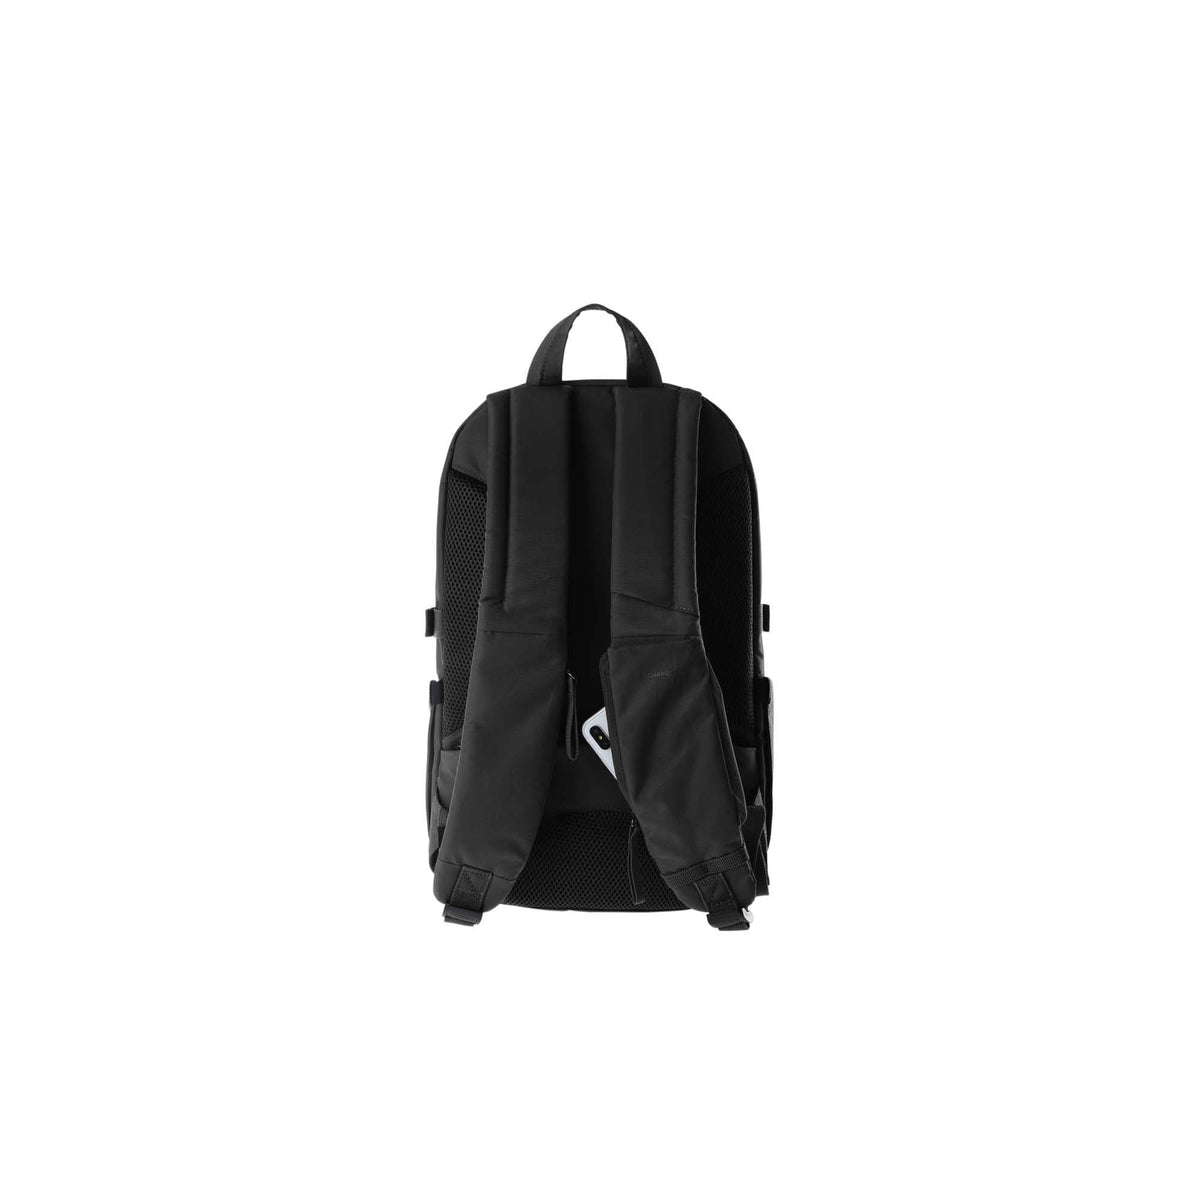 Tucano Bravo Backpack for 15.6" Macbook and Laptop